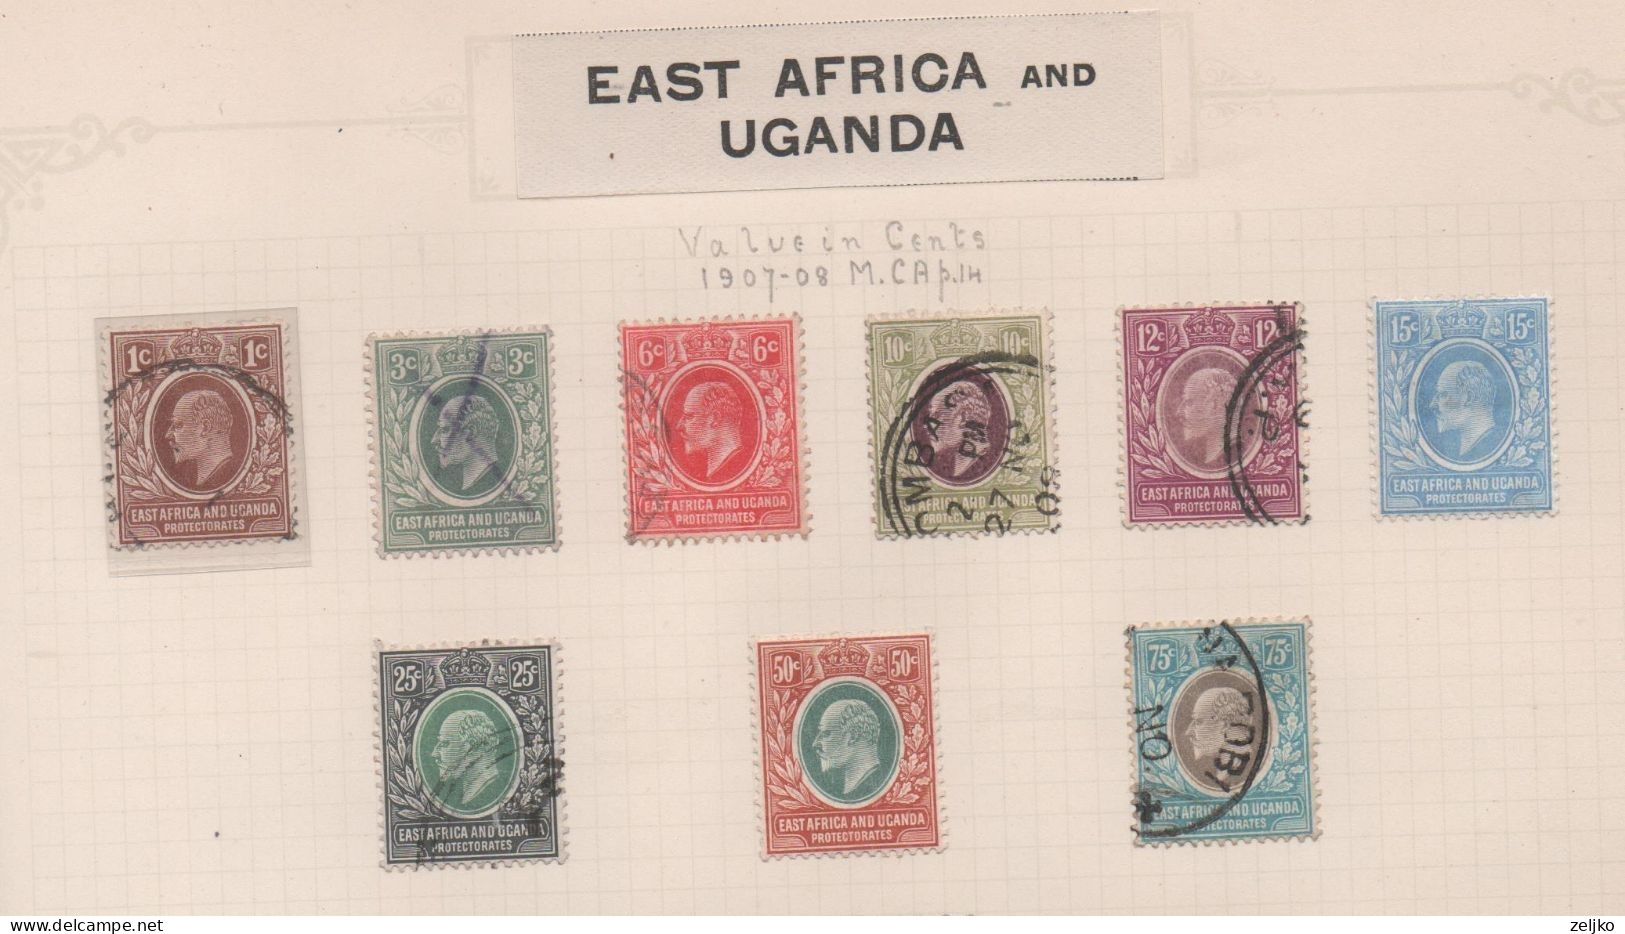 East Africa And Uganda, 1907 - 1908 ,  Used 15c And 50 C MH, Michel 33 - 41 - Protectorats D'Afrique Orientale Et D'Ouganda